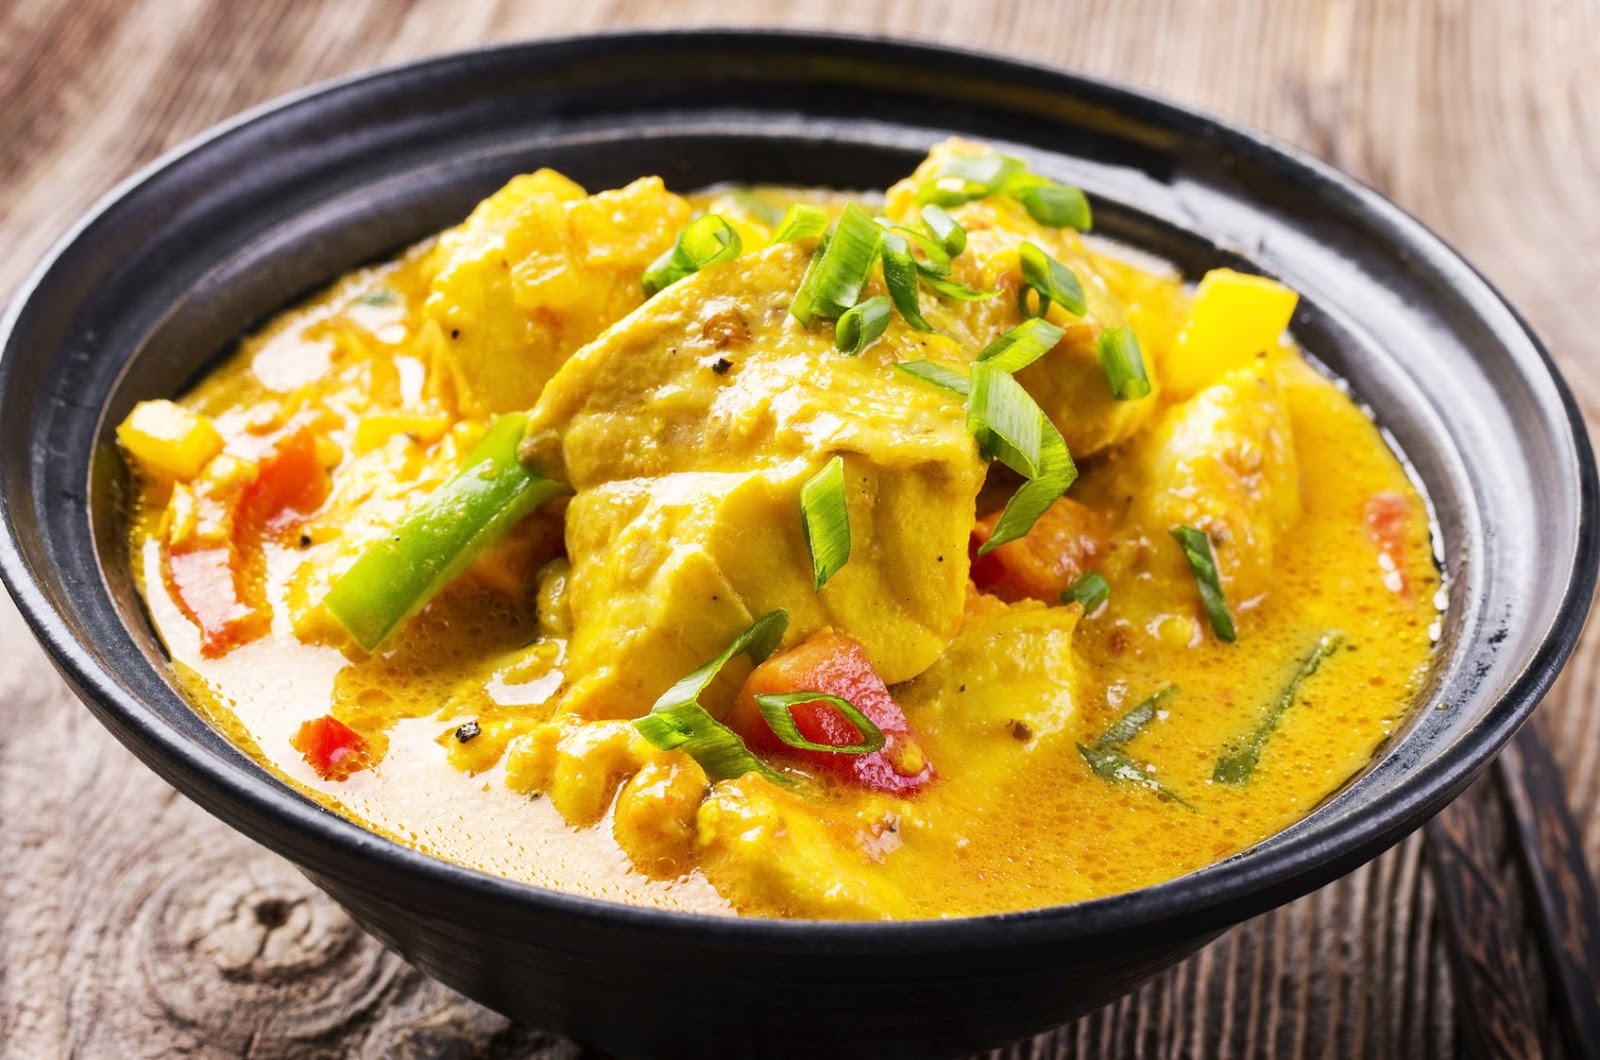 How To Make Thai Red Curry Fish Stew